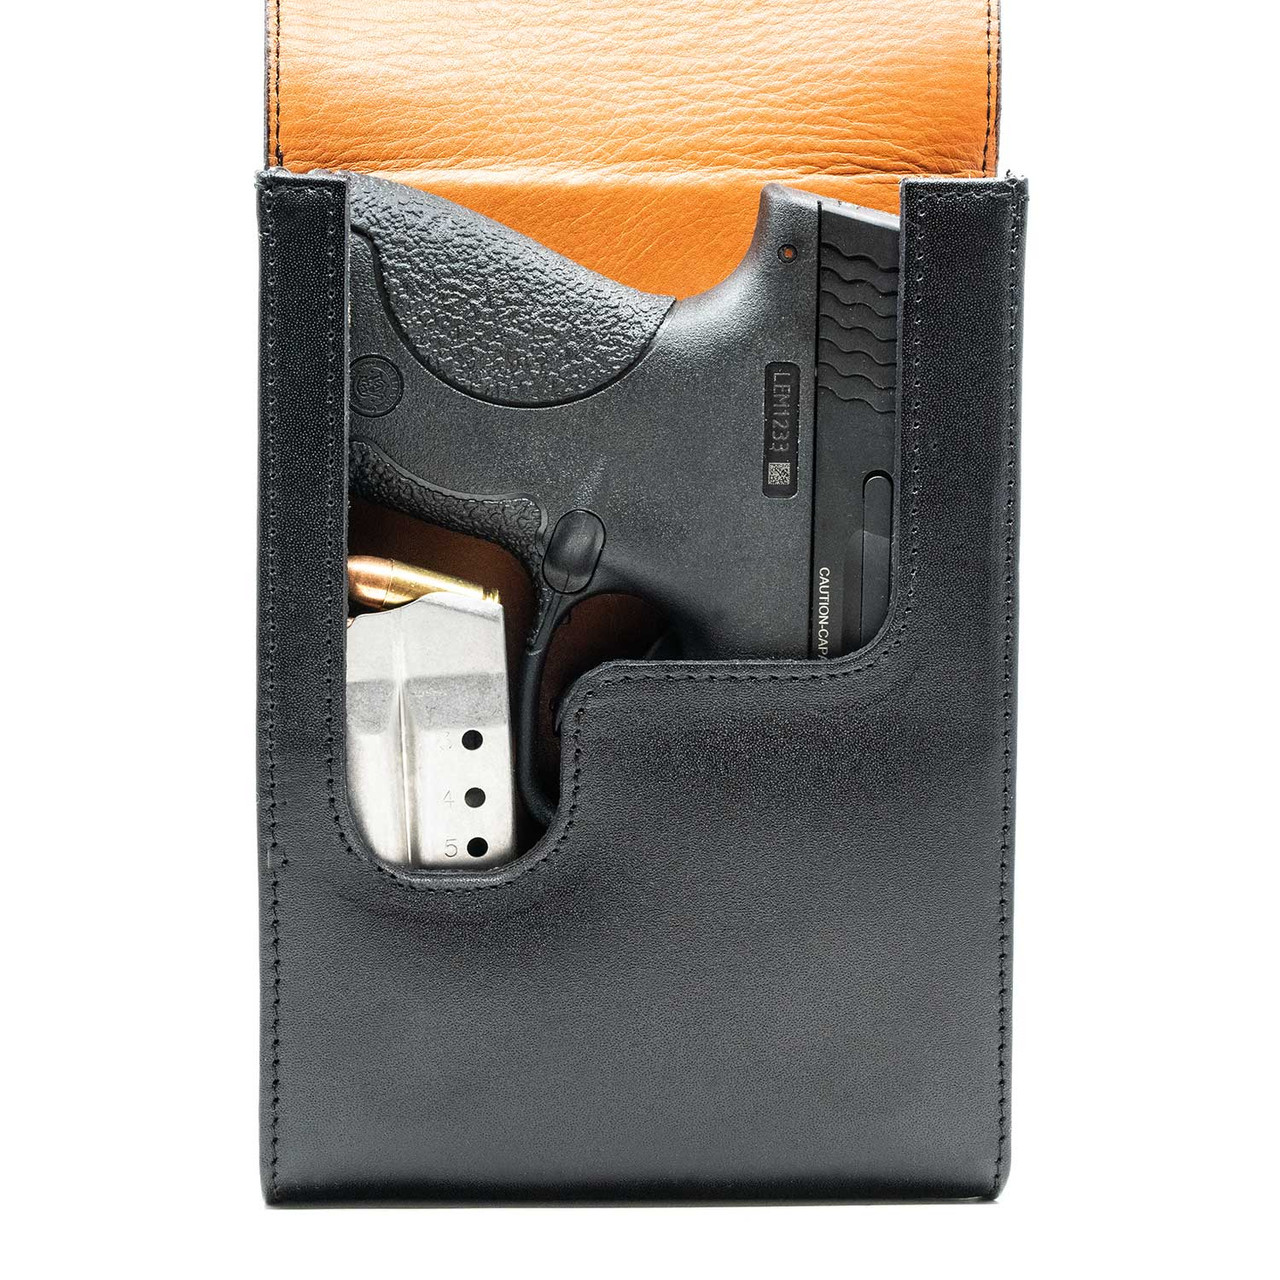 The Kahr MK40 Xtra Mag Black Leather Holster